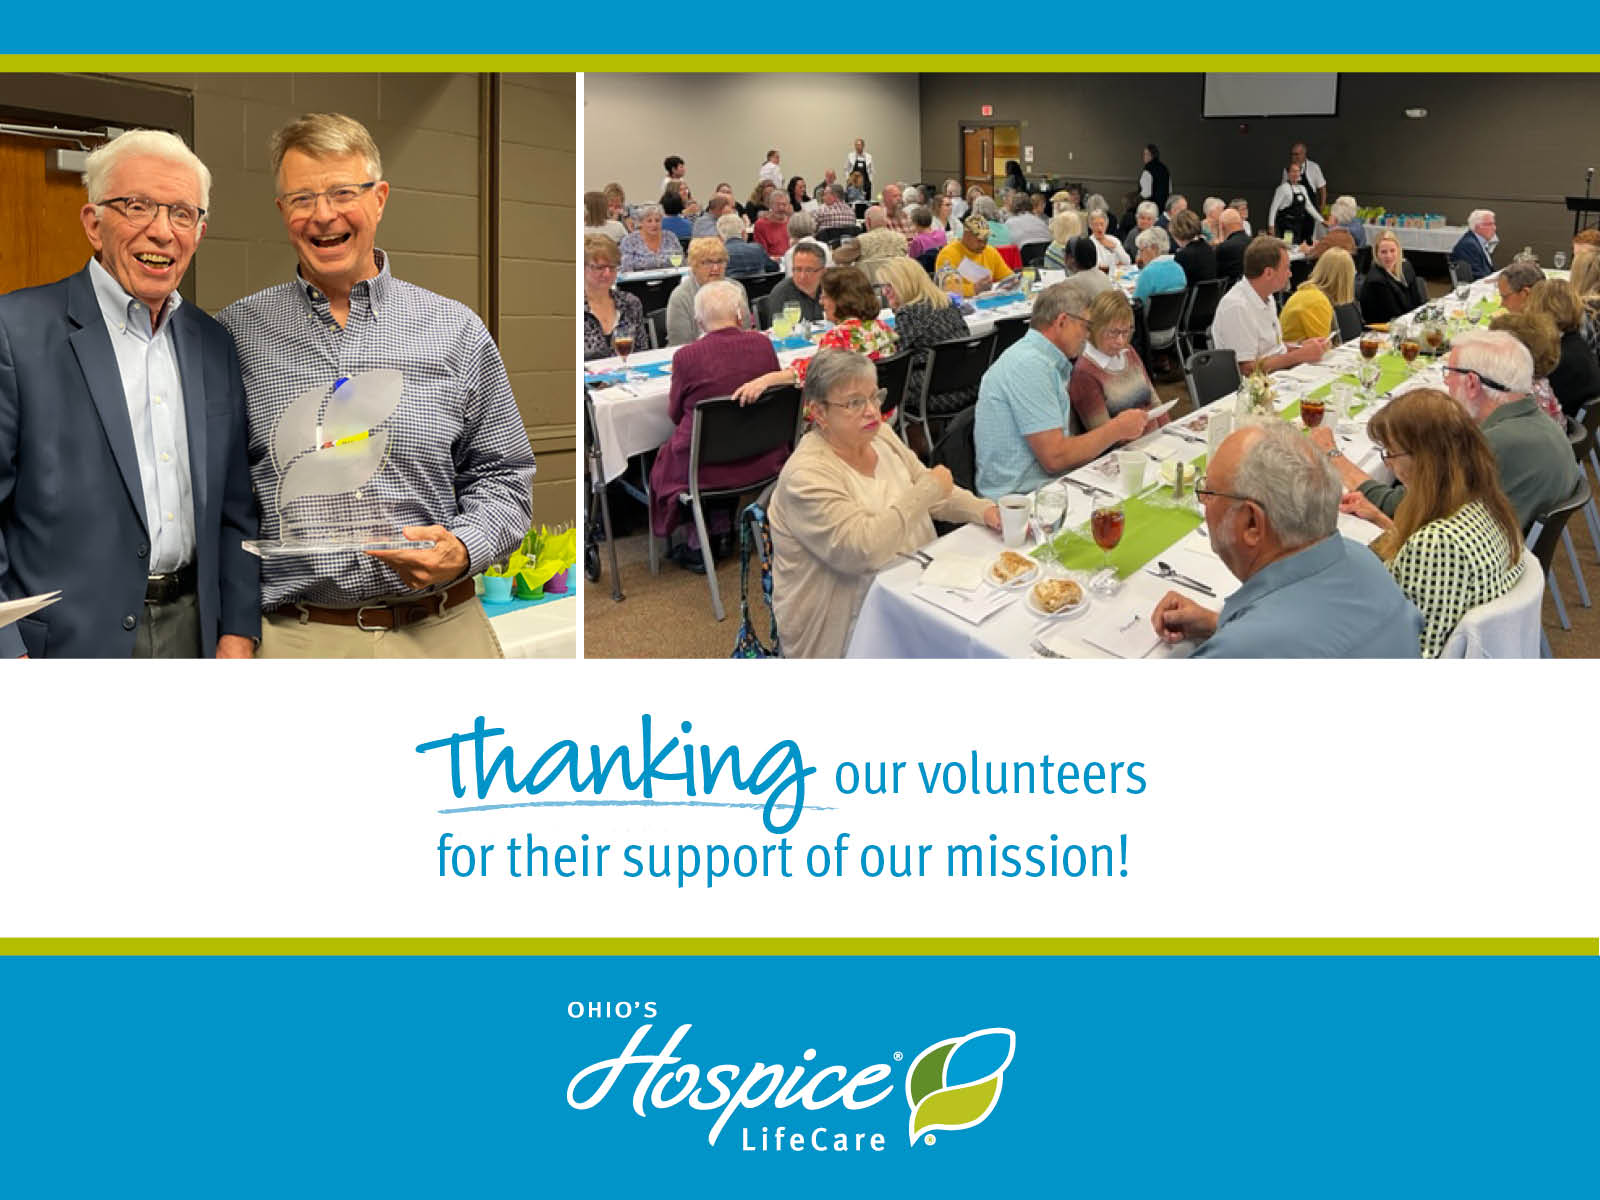 Thanking our volunteers for their support of our mission! Ohio's Hospice LifeCare